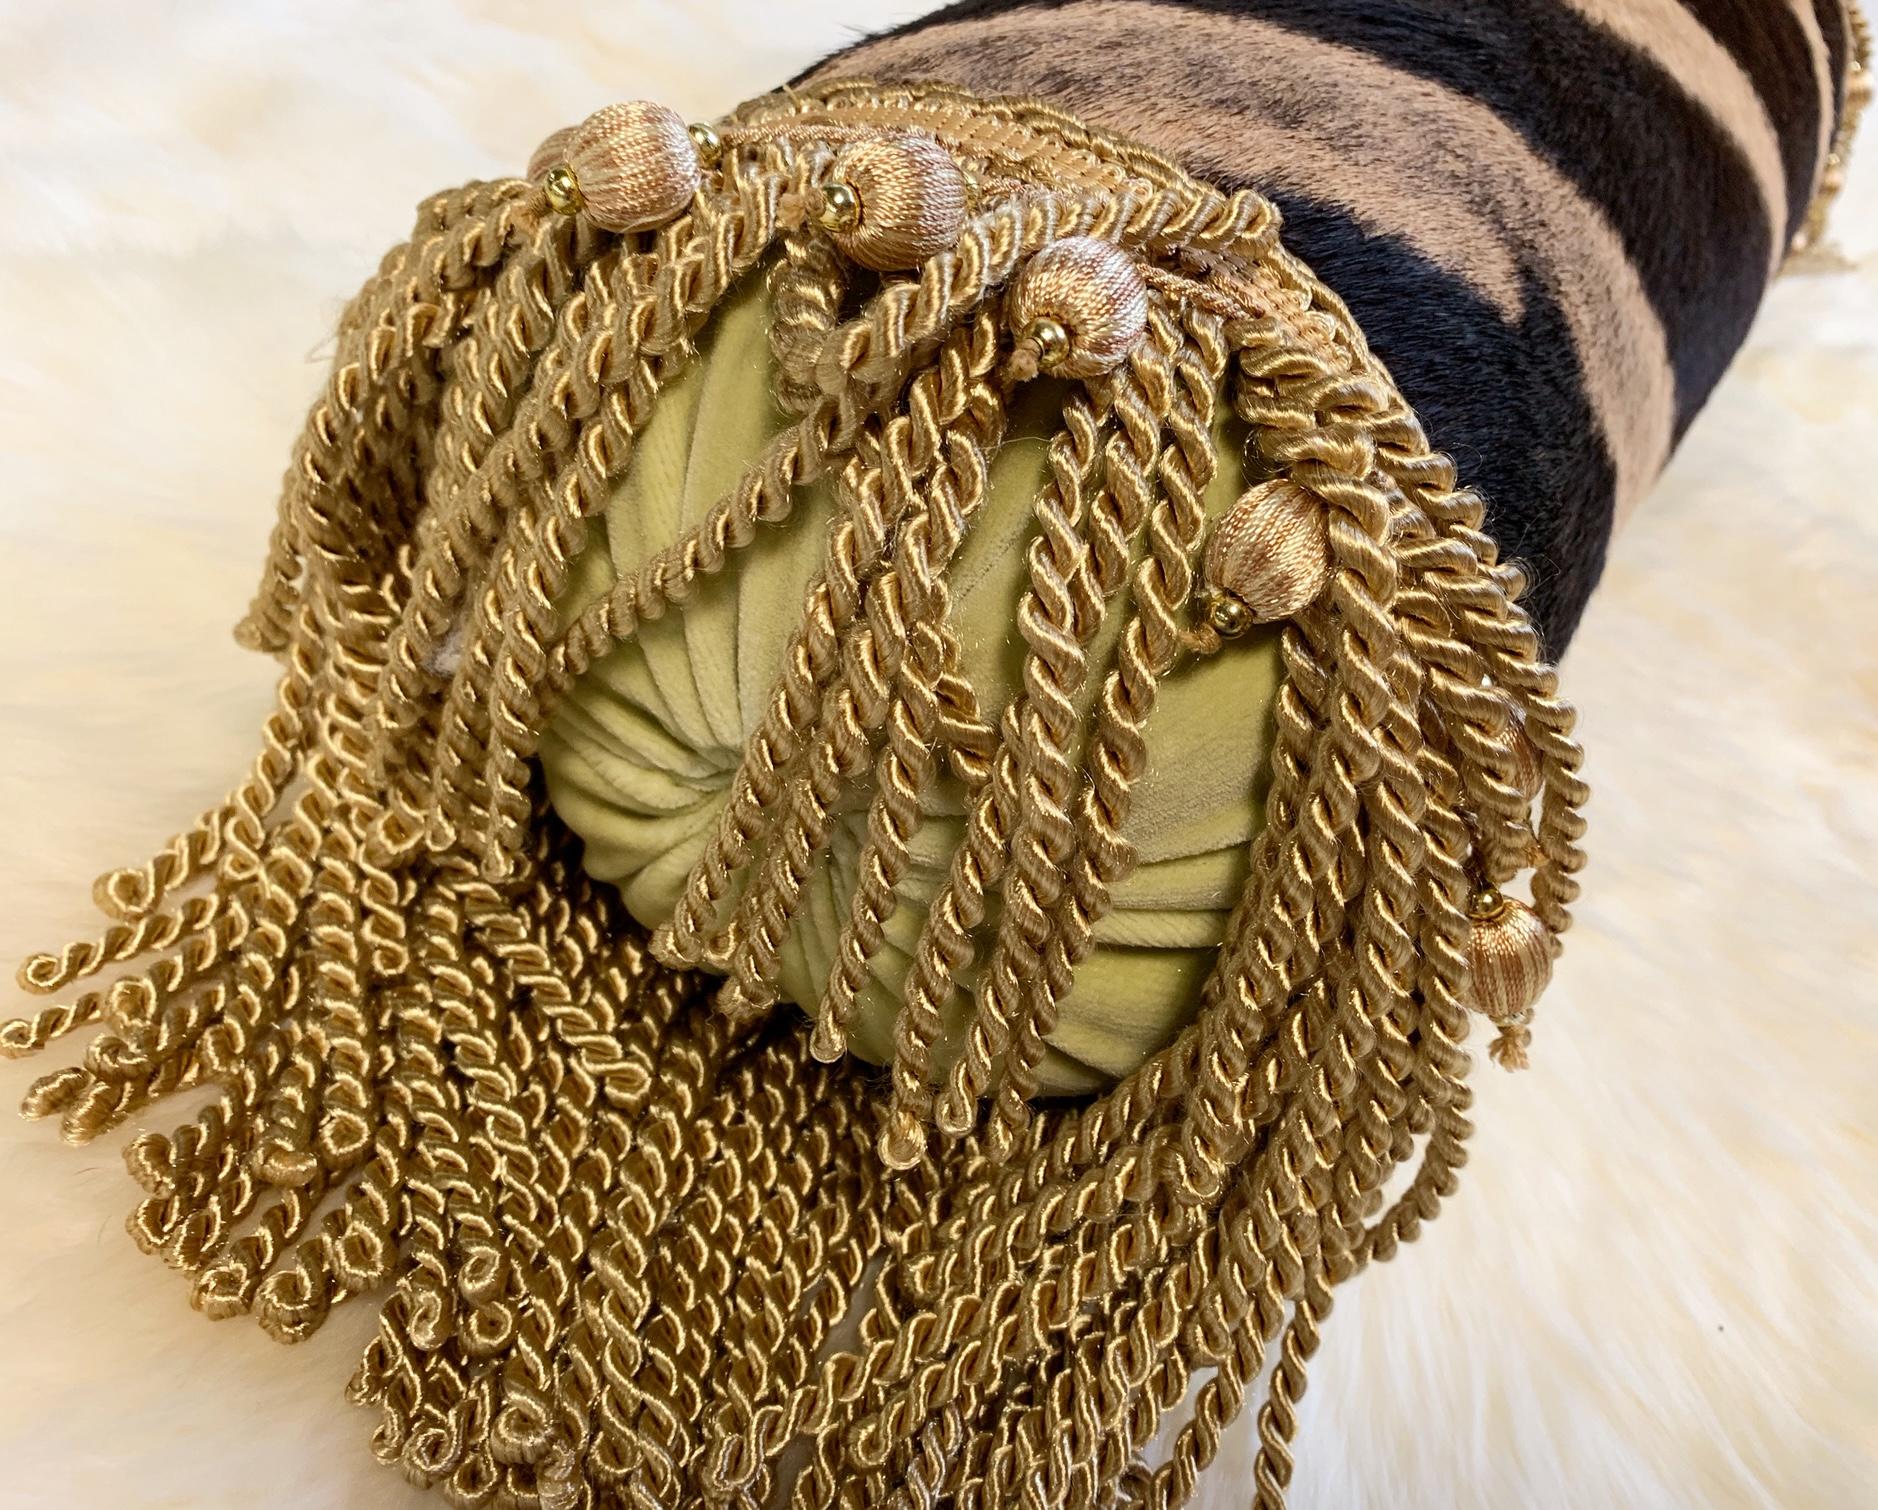 Forsyth zebra hide pillows are simply the best. The most beautiful hides are selected, hand cut, hand stitched, and hand stuffed with the finest goose down. Each step is meticulously curated by Saint Louis based Forsyth artisans. This fringe and